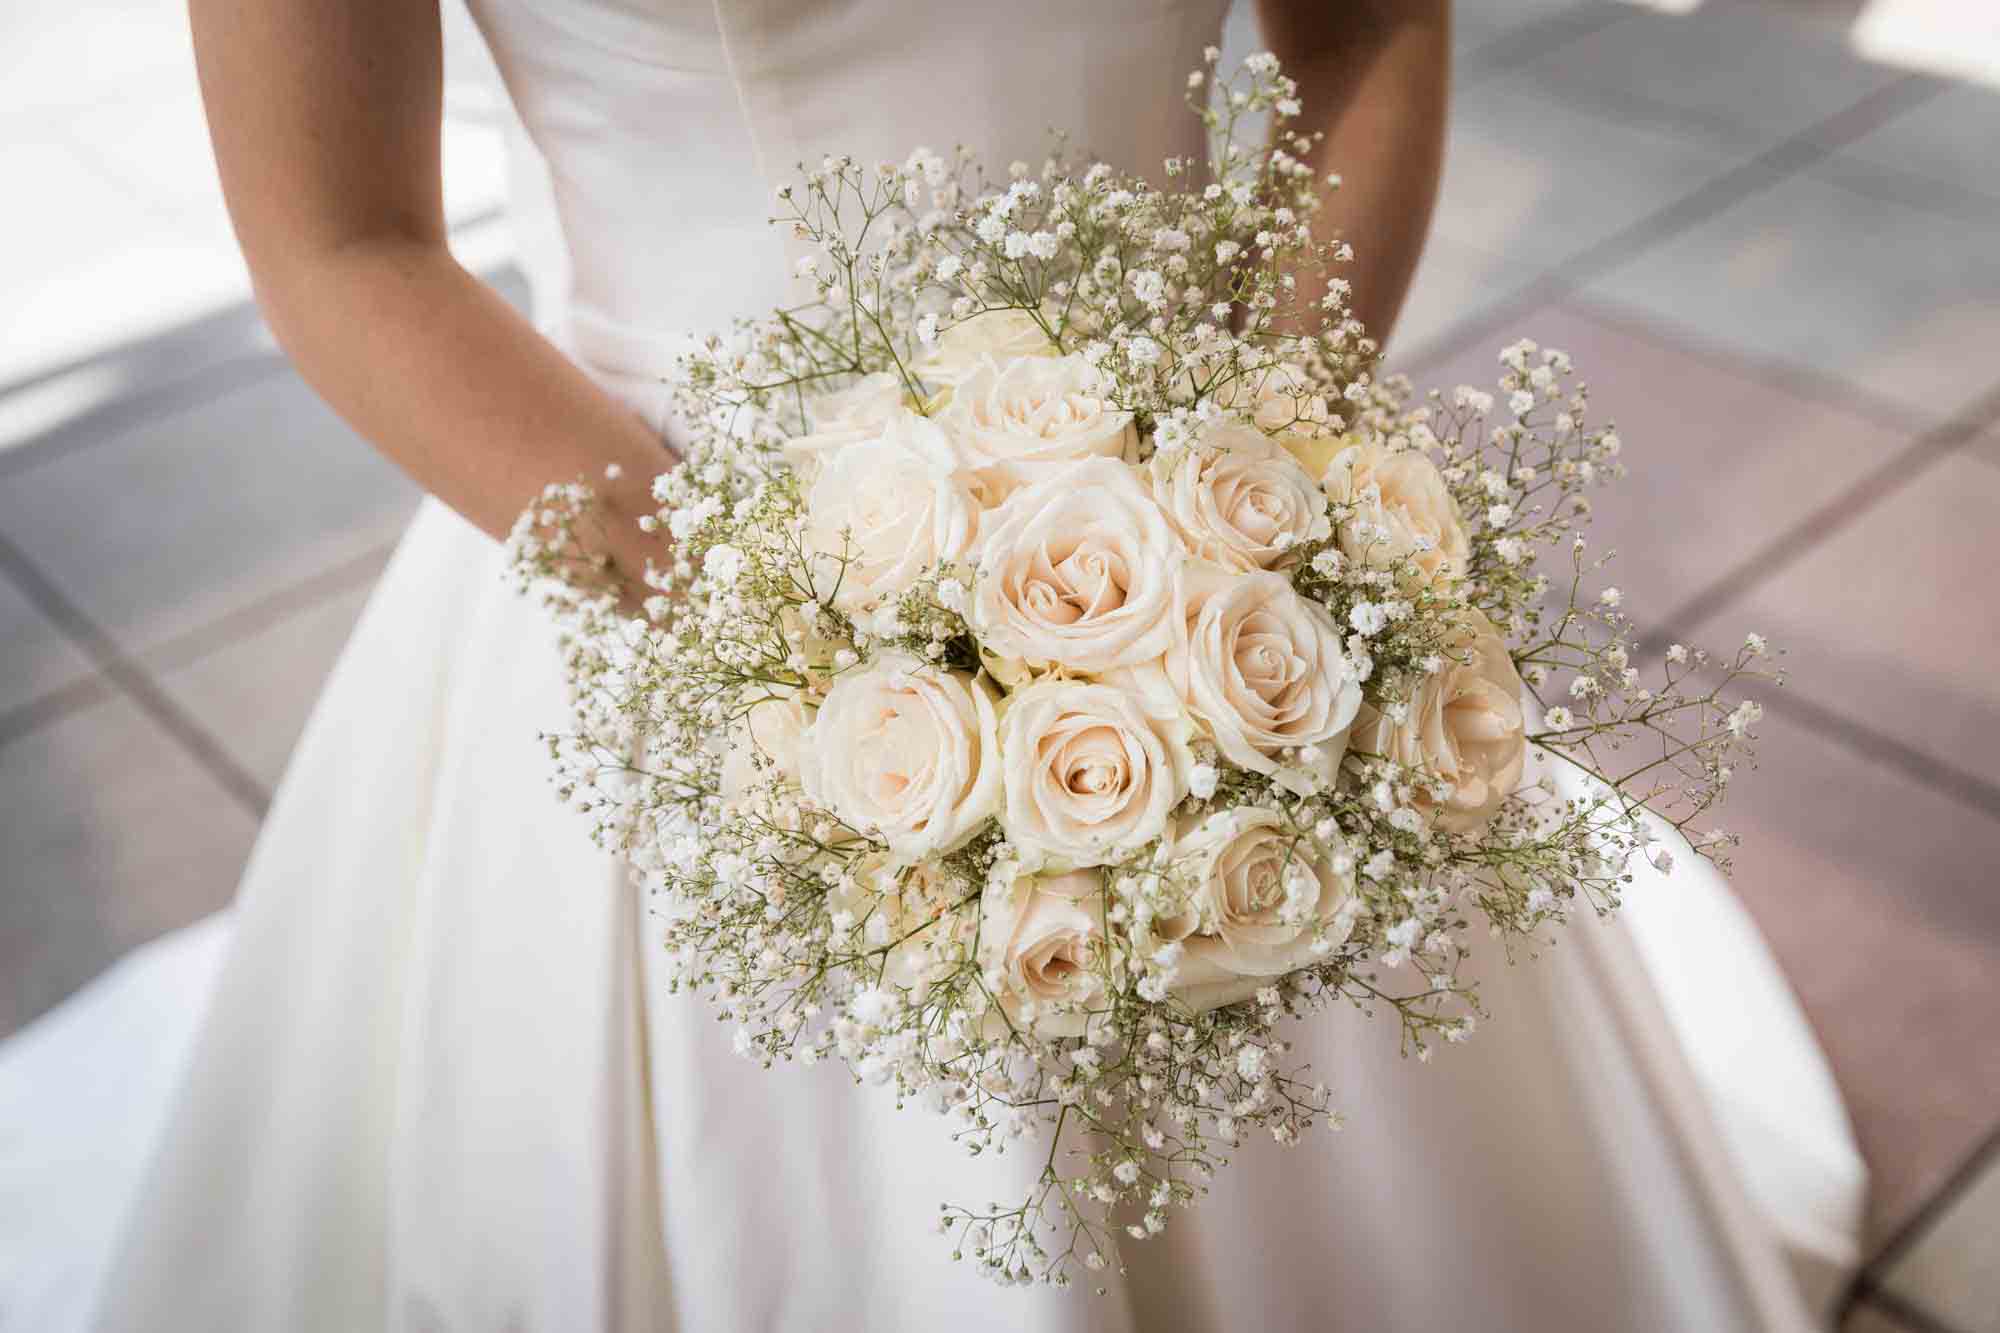 Close up of bride wearing white dress holding flower bouquet of roses and baby's breath at a Sheraton LaGuardia East Hotel wedding